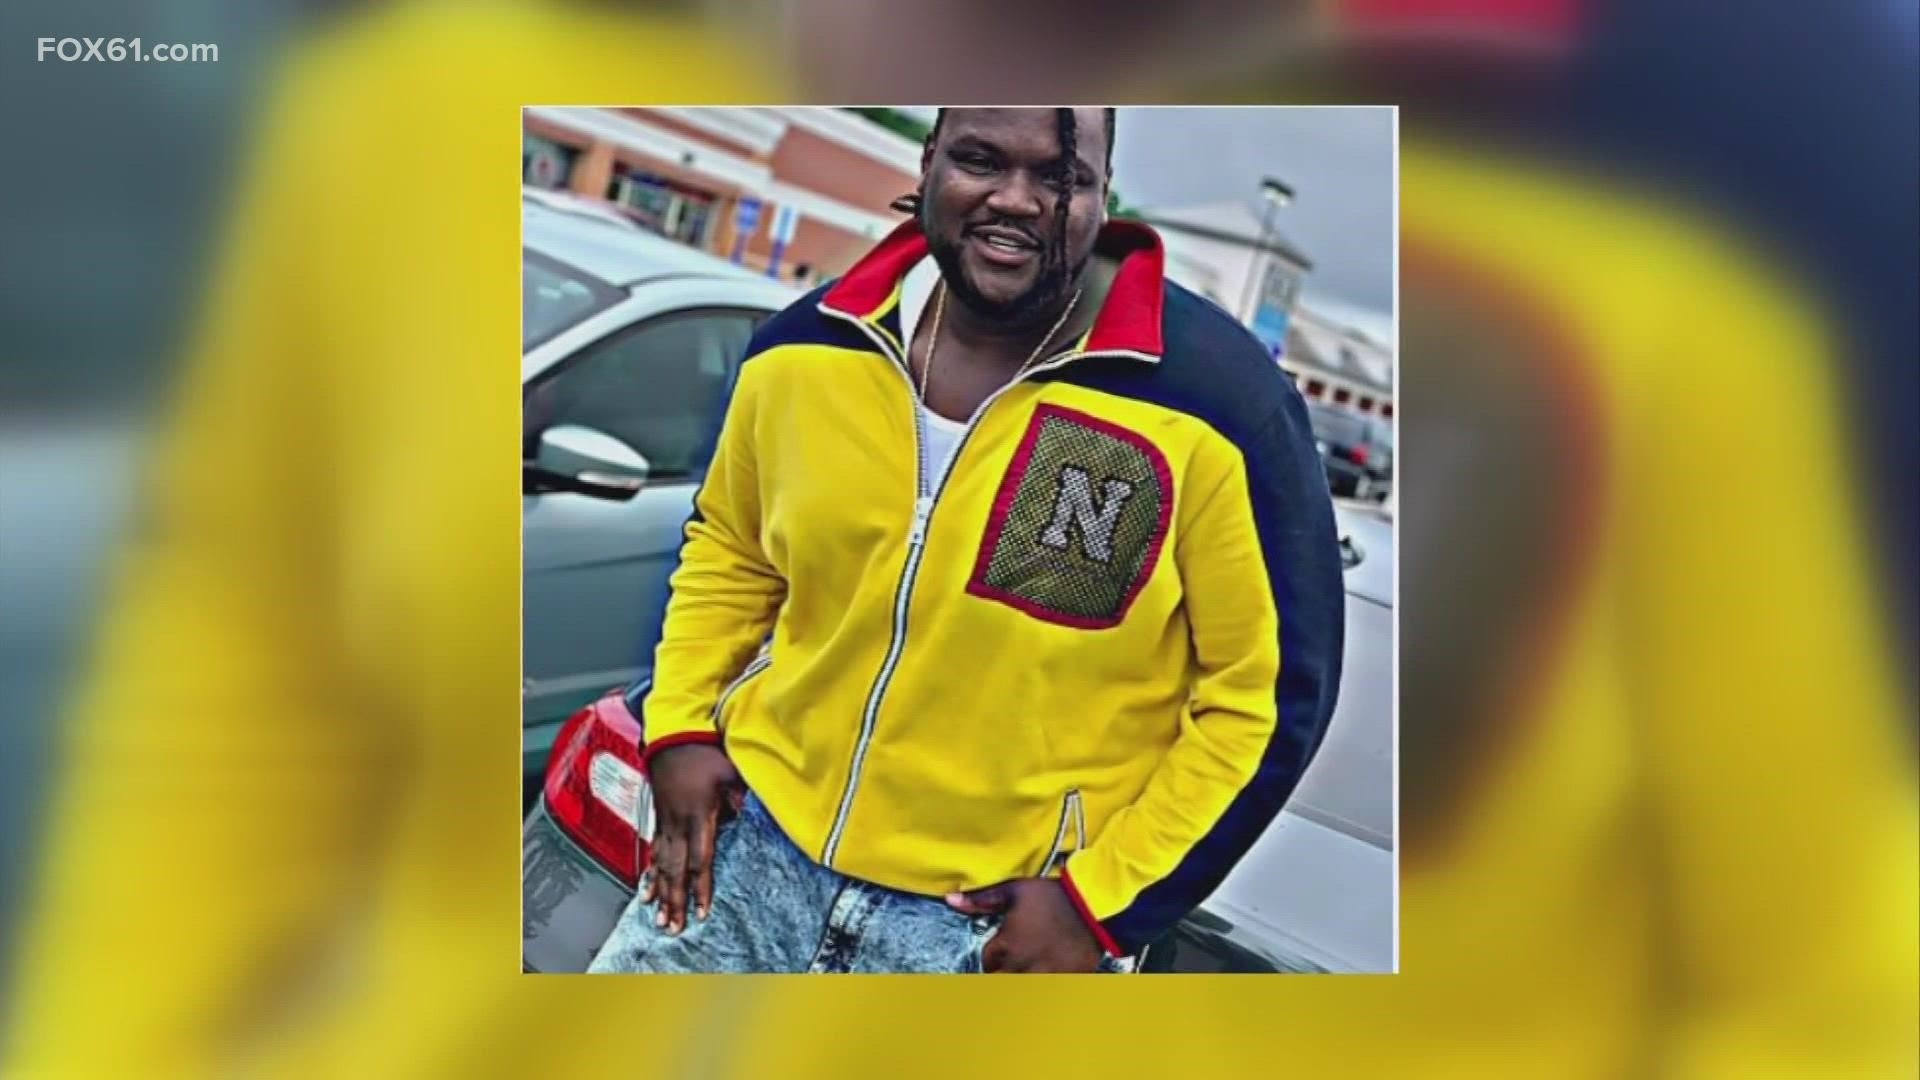 Trequon Lawrence, 27, was struck by gunfire on Newhall Street Wednesday night. The incident marked the city's fifth shooting in four days, three of them fatal.